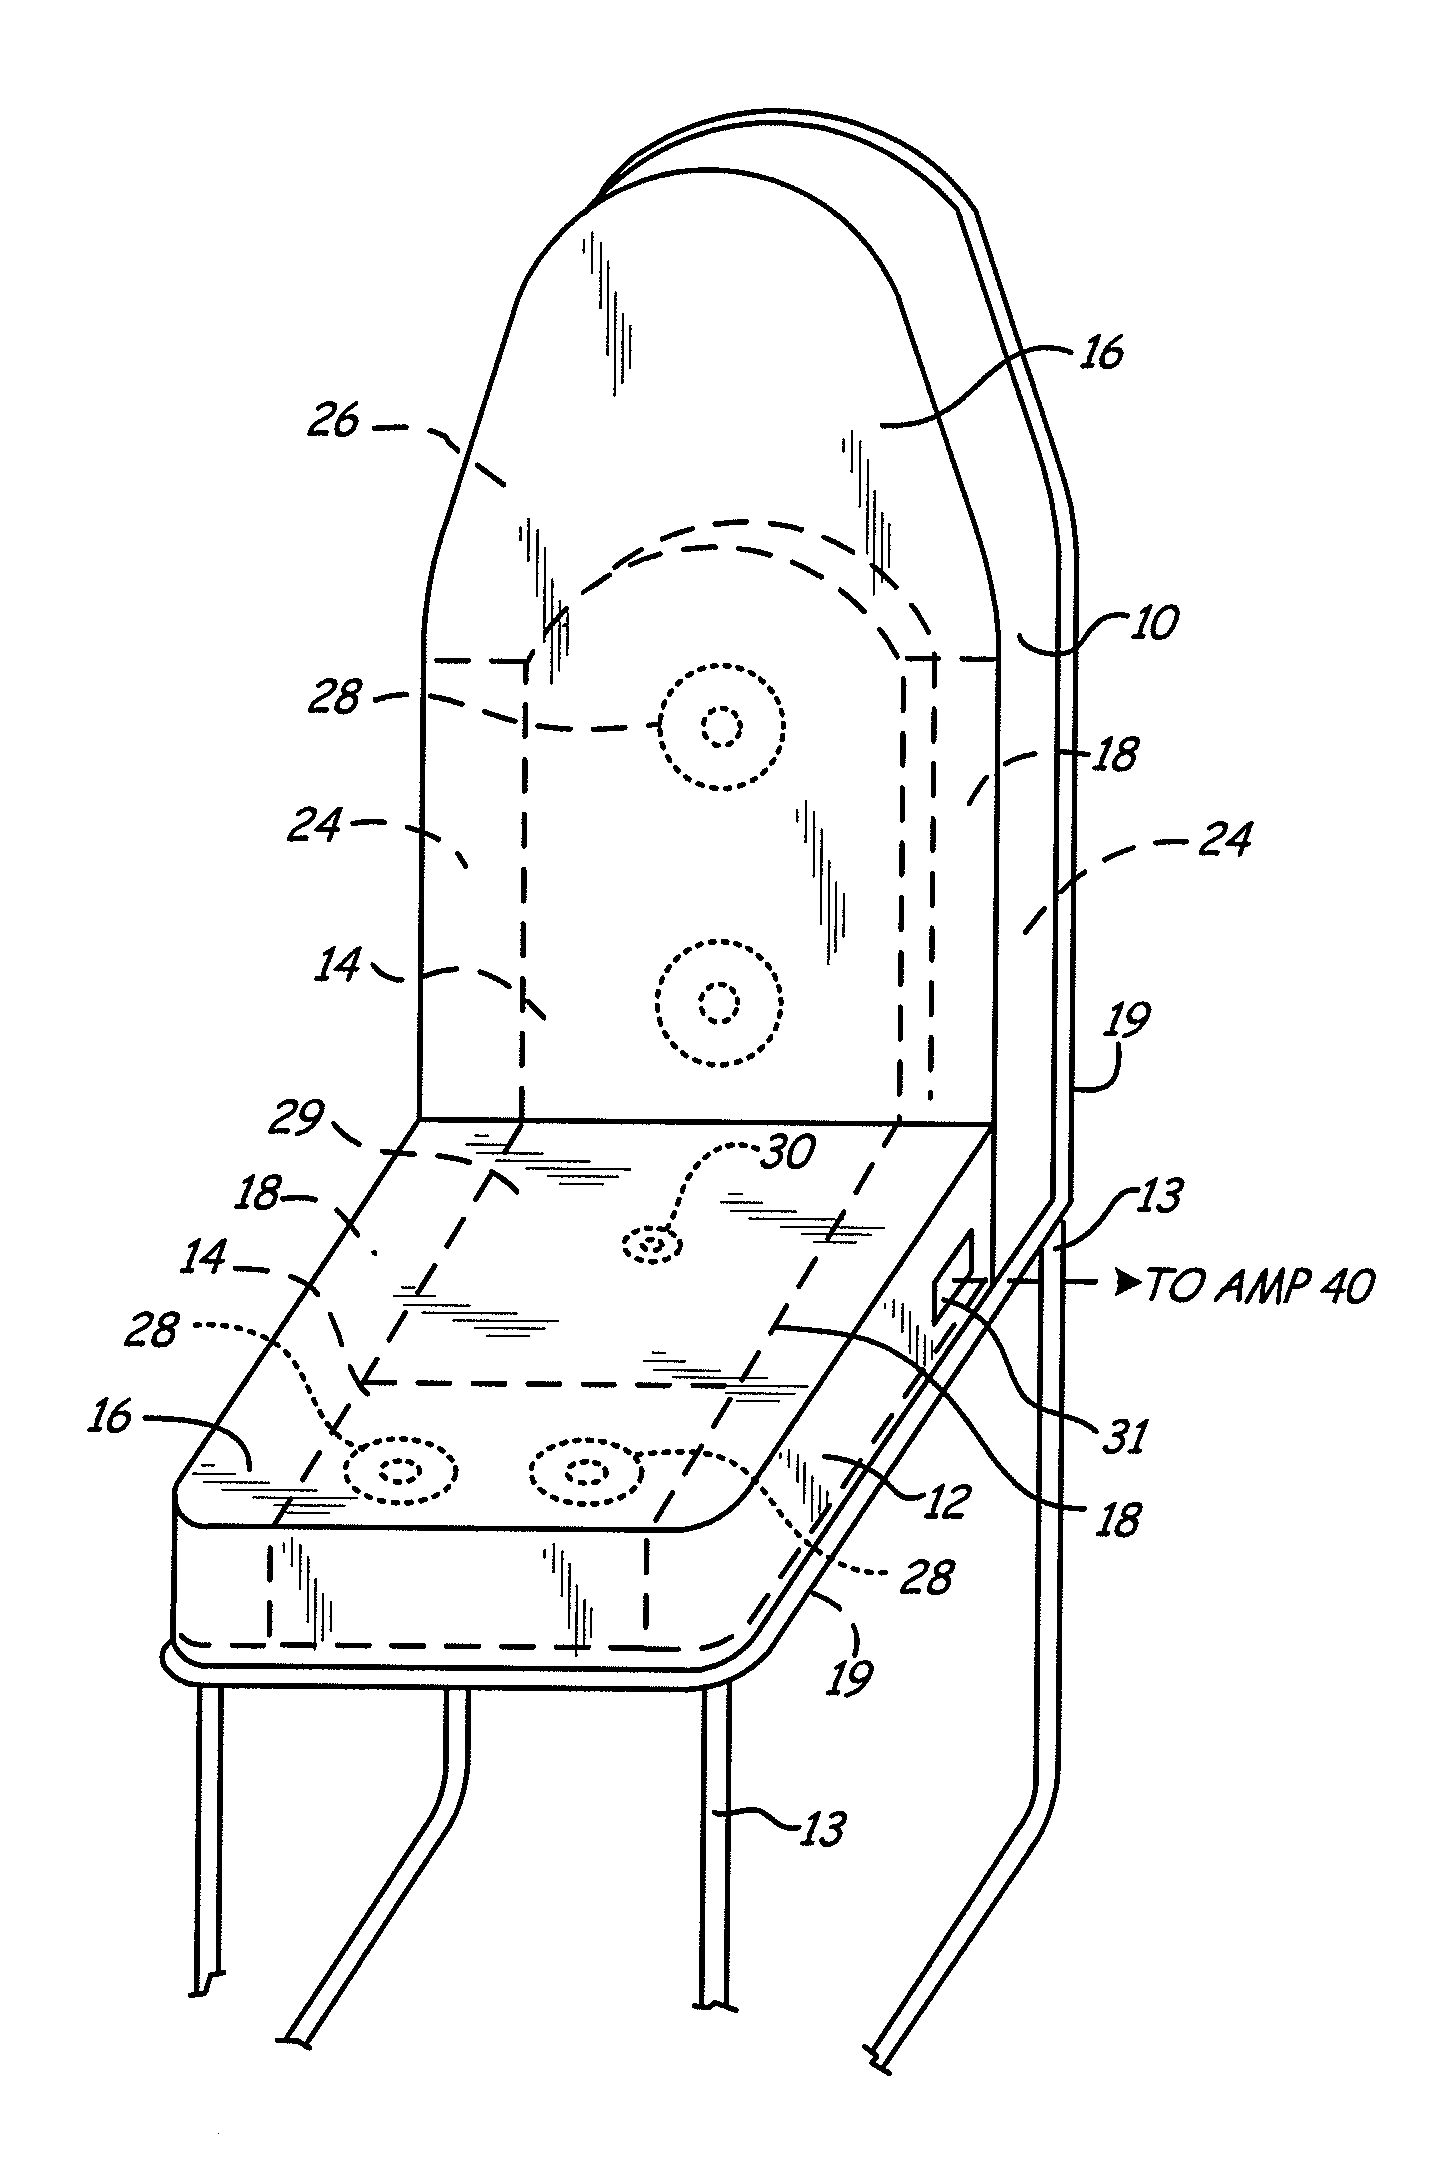 Sound and vibration transmission pad and system